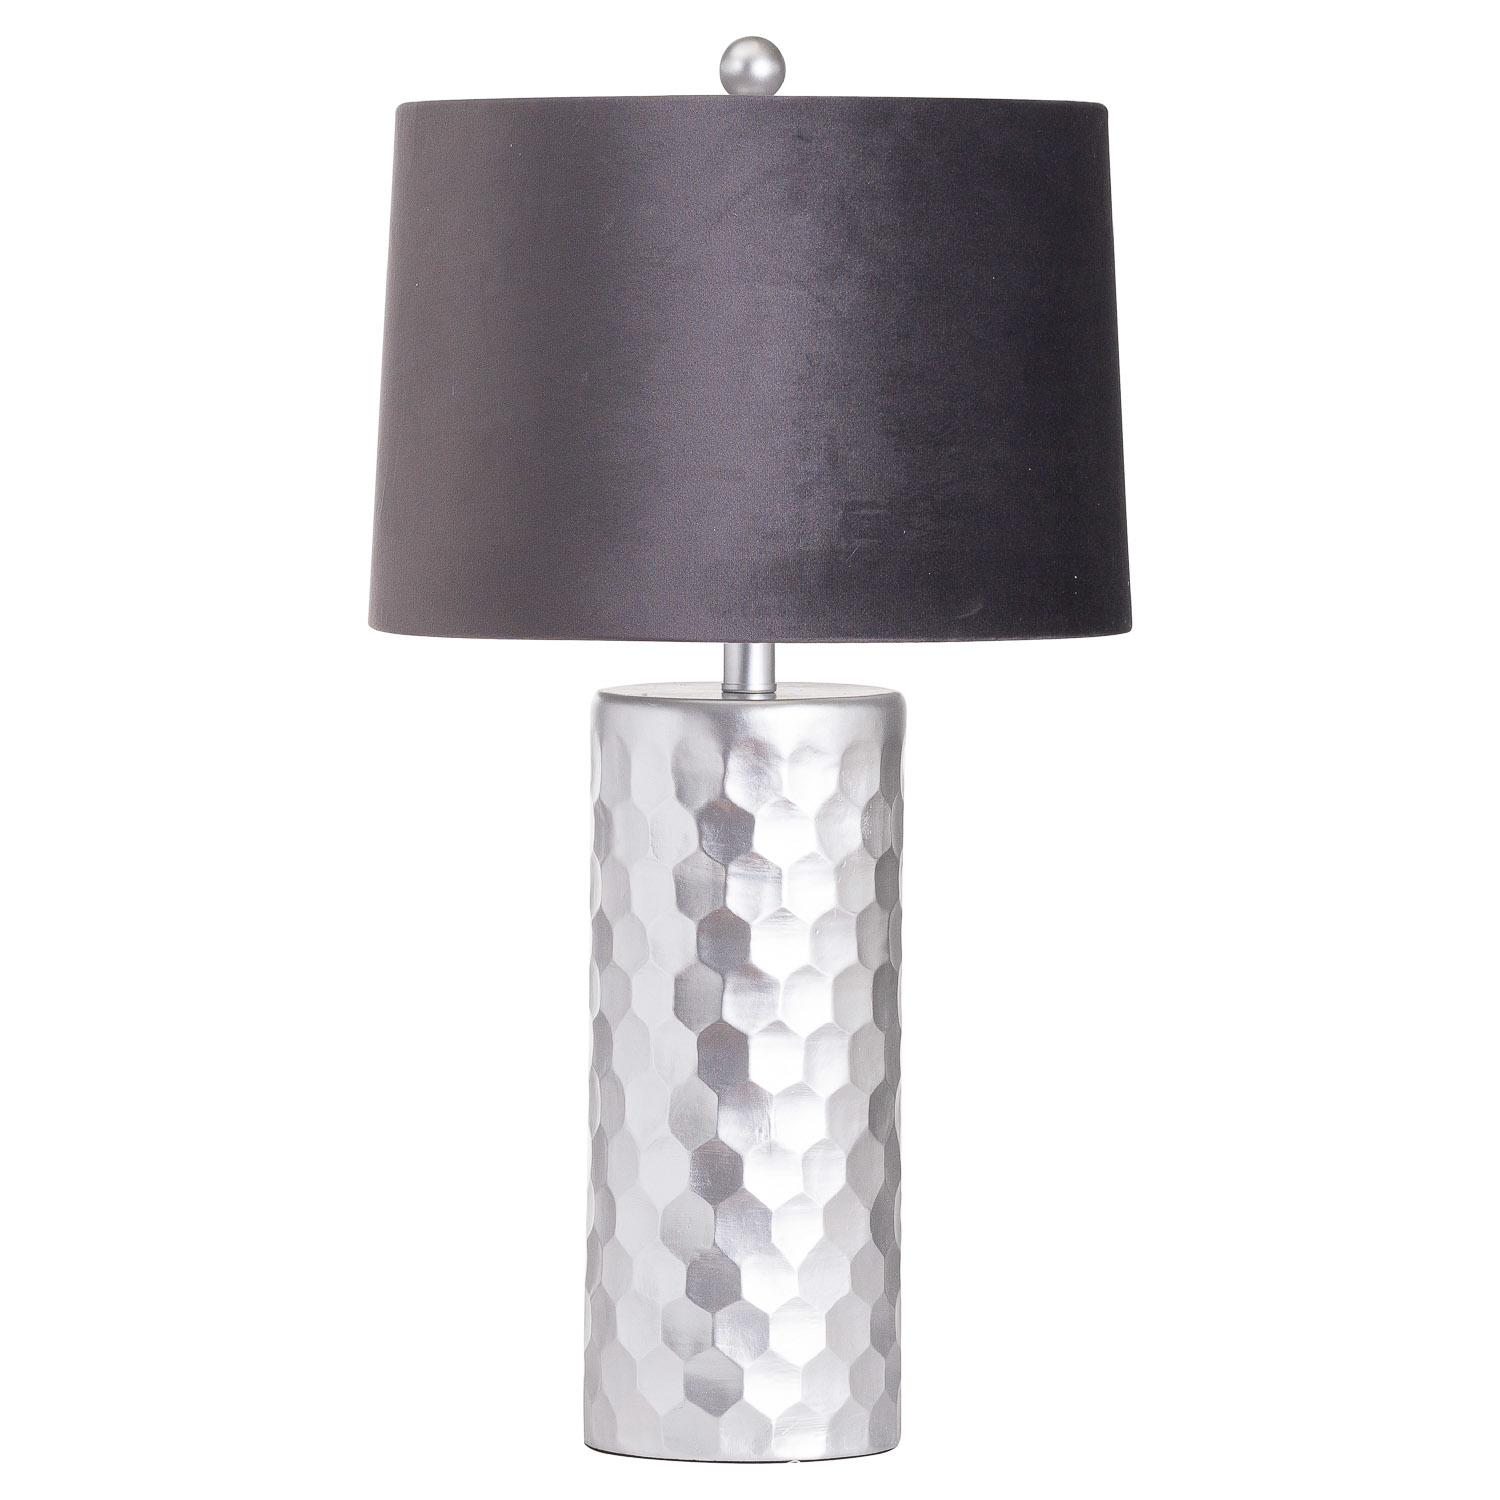 Honey Comb Silver Table Lamp With Grey Velvet Shade New Design 